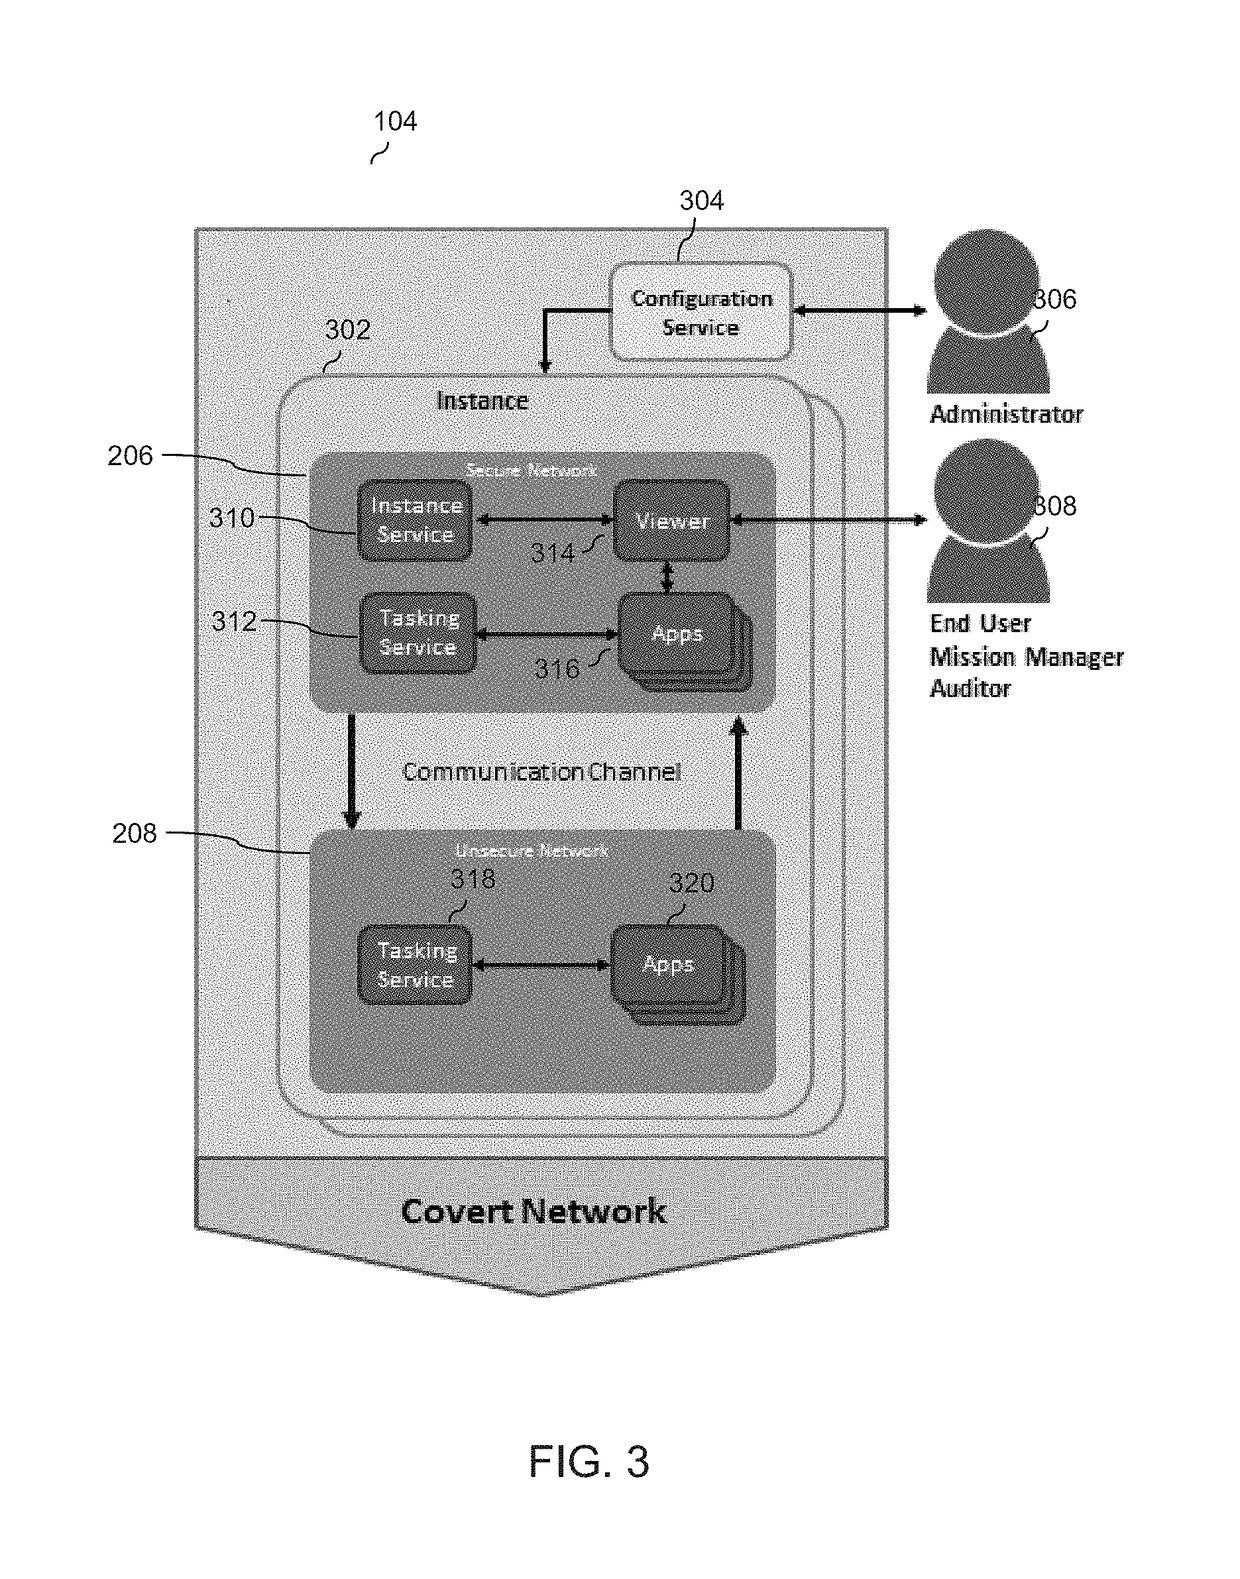 Systems and methods for optimizing computer network operations